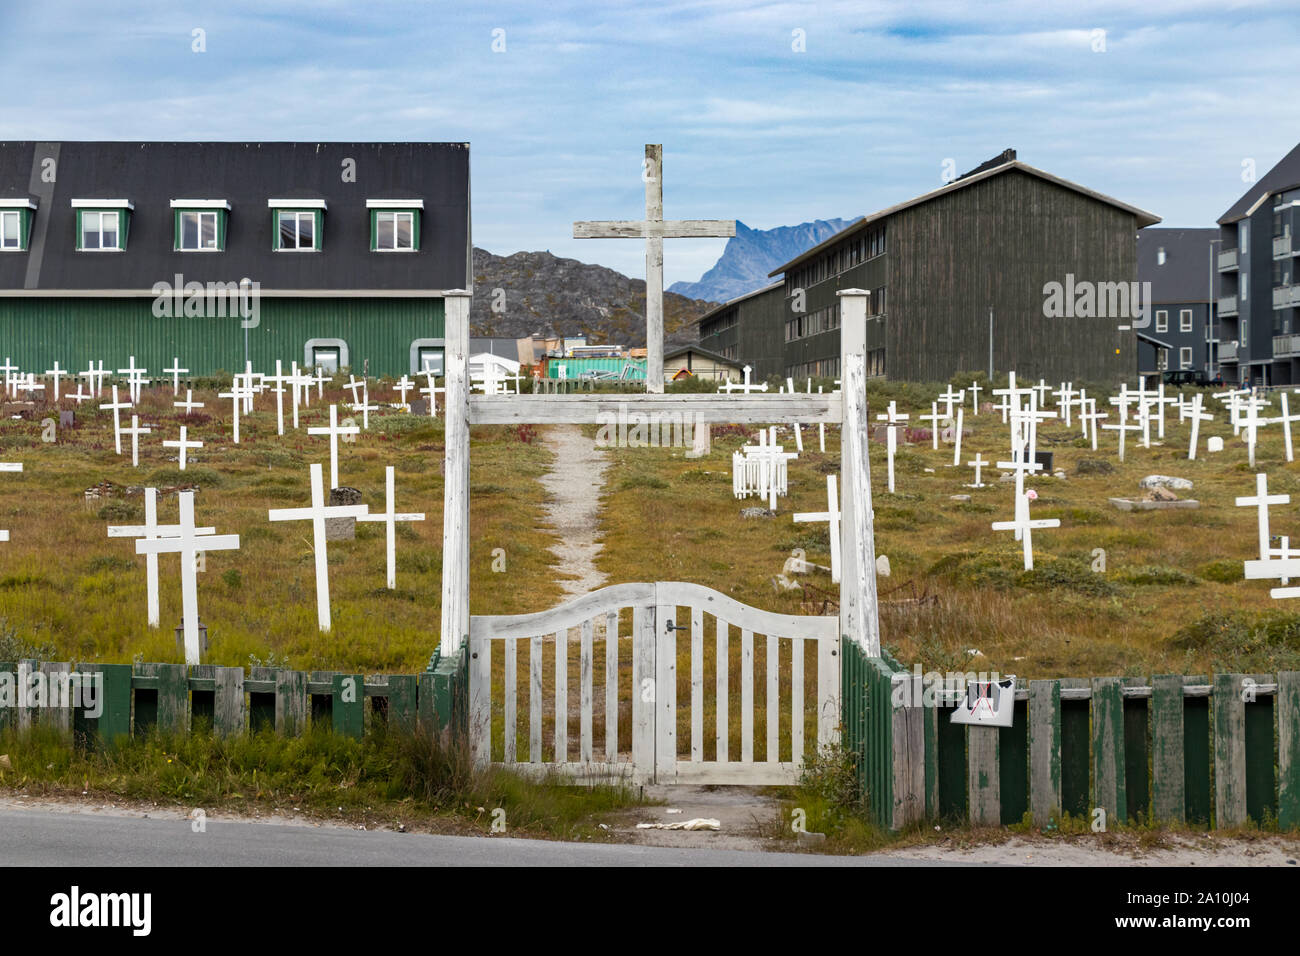 Entrance of the Nuuk cemetery on Aqqusinersuaq street, Greenland. Stock Photo